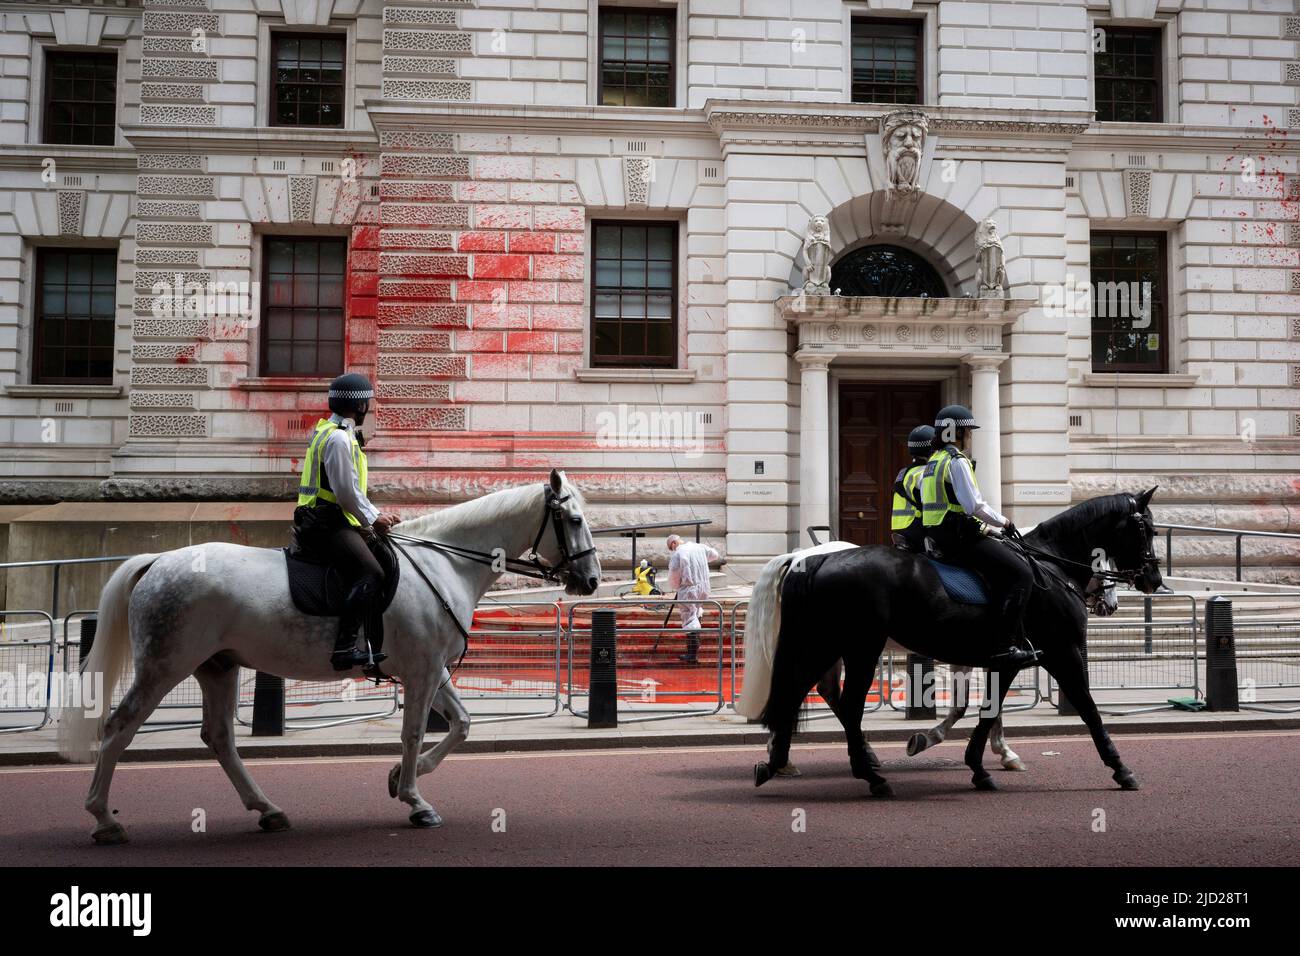 The aftermath of a red paint protest by climate change activists with 'Just Stop Oil' who sprayed the exterior and steps of the Treasury in Horseguards, on 13th June 2022, in London, England. 'Just Stop Oil' took direct action for a UK government policy encouraging oil & gas expansion, they say. Stock Photo